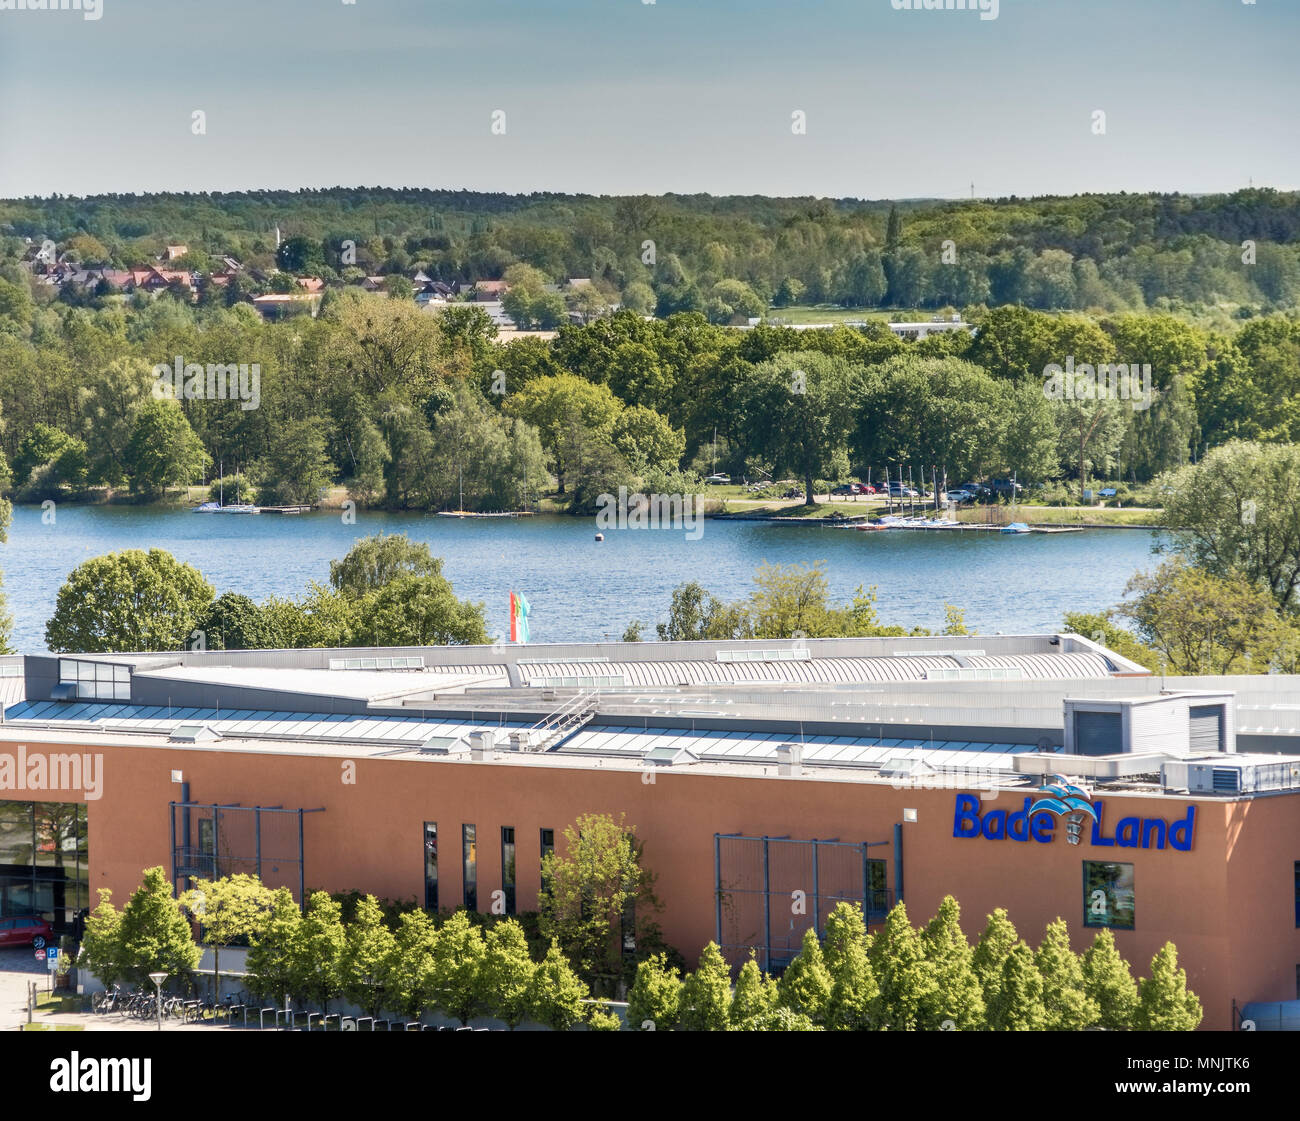 Wolfsburg, lower saxony, germany, May 5, 2018: aerial view over the main building of the Badeland, a public swimming pool, over the Allersee to the ou Stock Photo